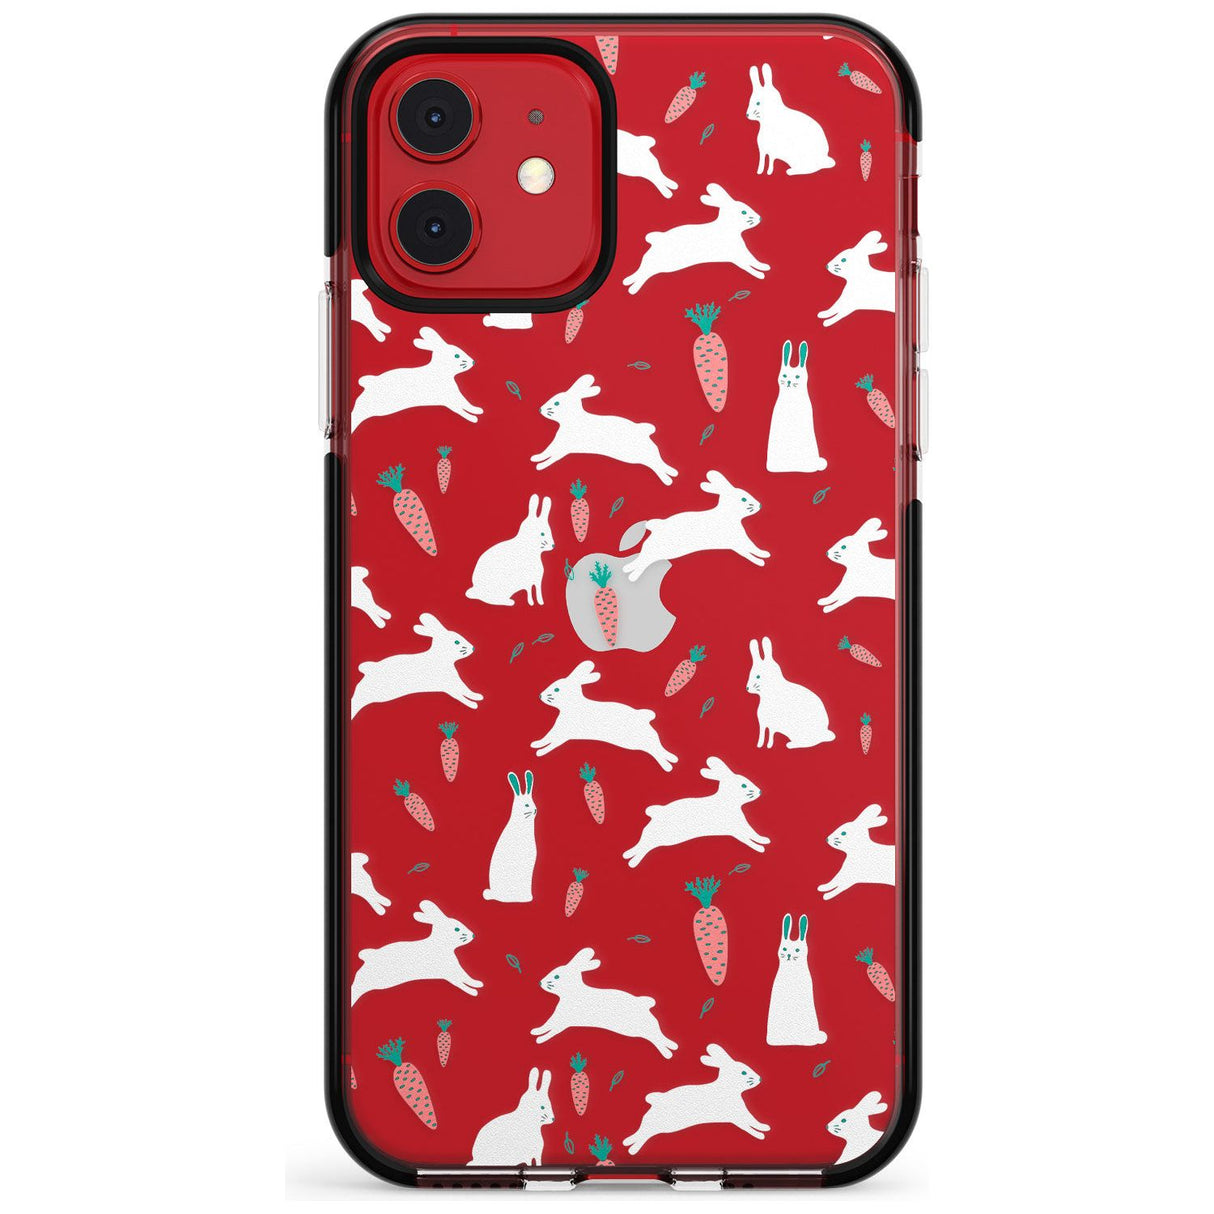 White Bunnies and Carrots Black Impact Phone Case for iPhone 11 Pro Max